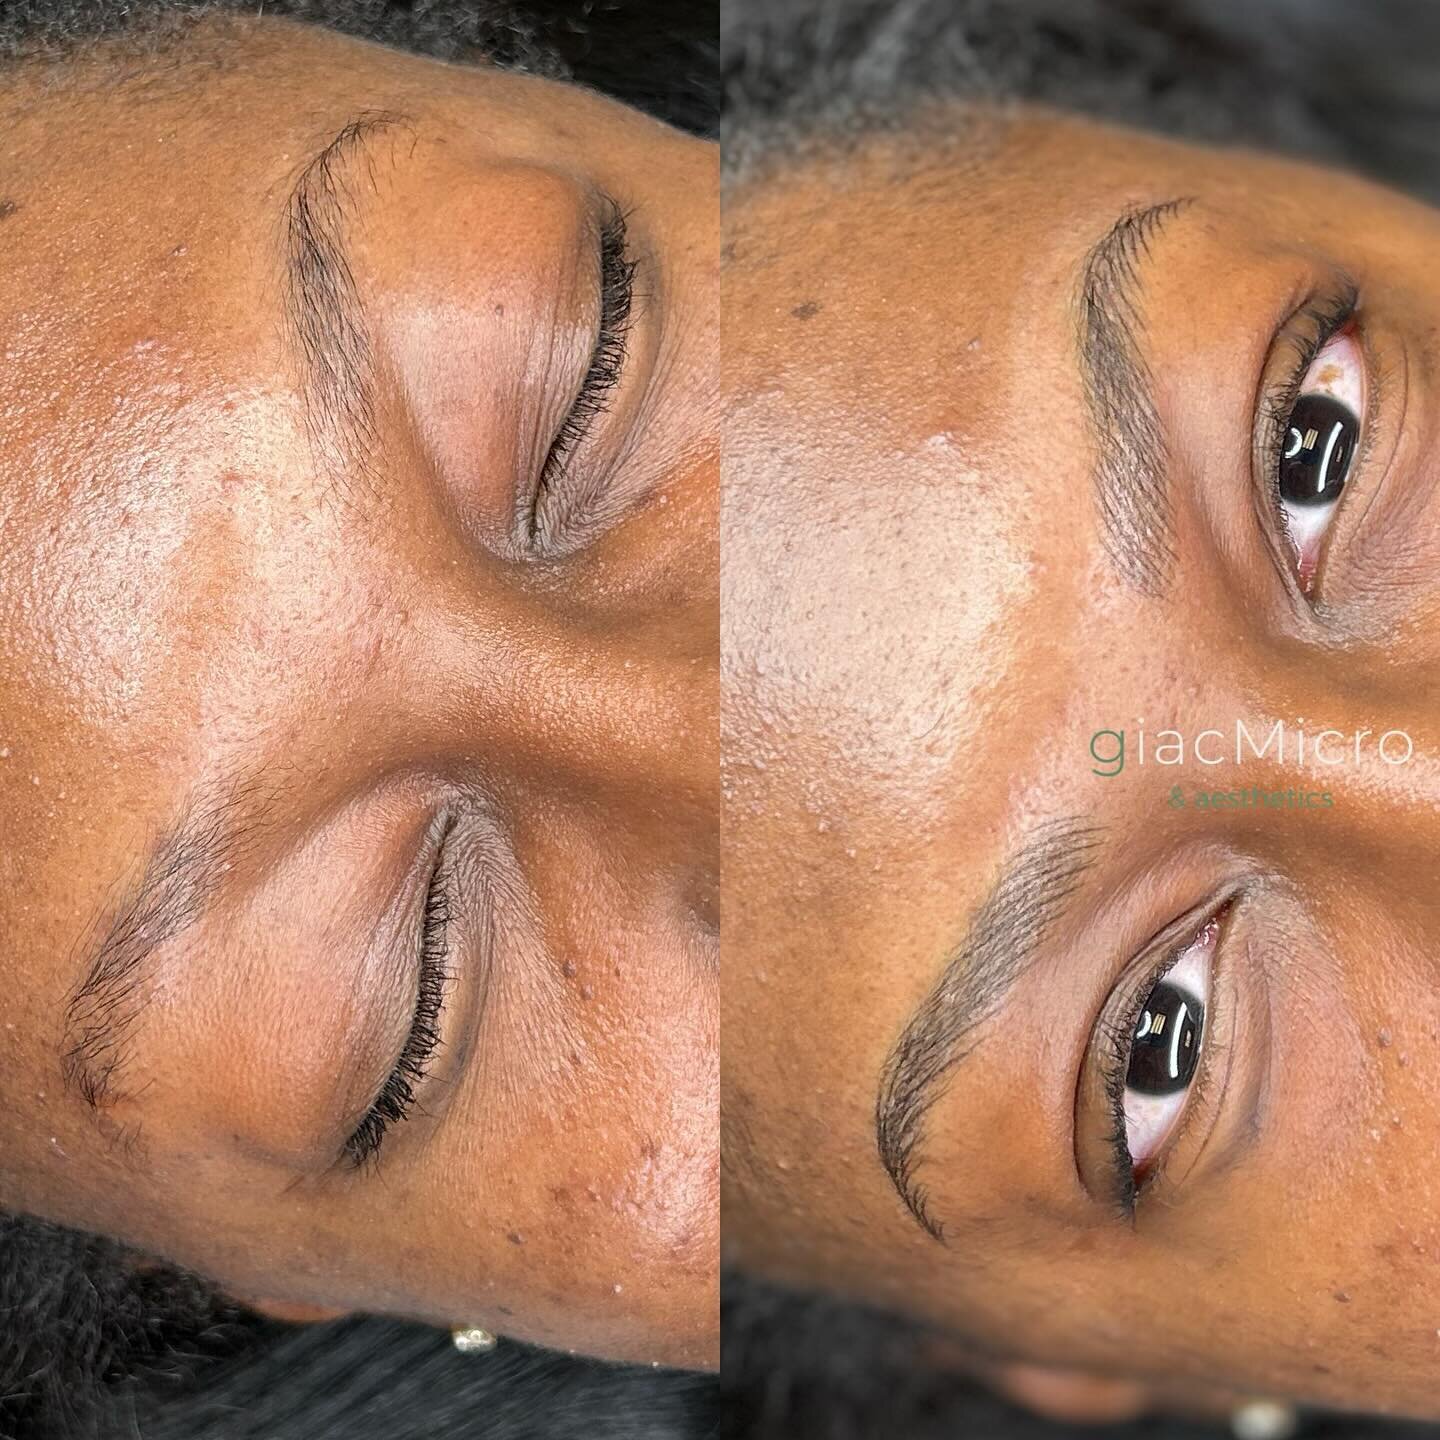 Stepping into the new year with perfectly defined Nano Brows🎉

#nano #pmu #browsonfleek #micropigmentation #medicalaesthetic #yeahthatgreenville #downtowngreenville #microblading